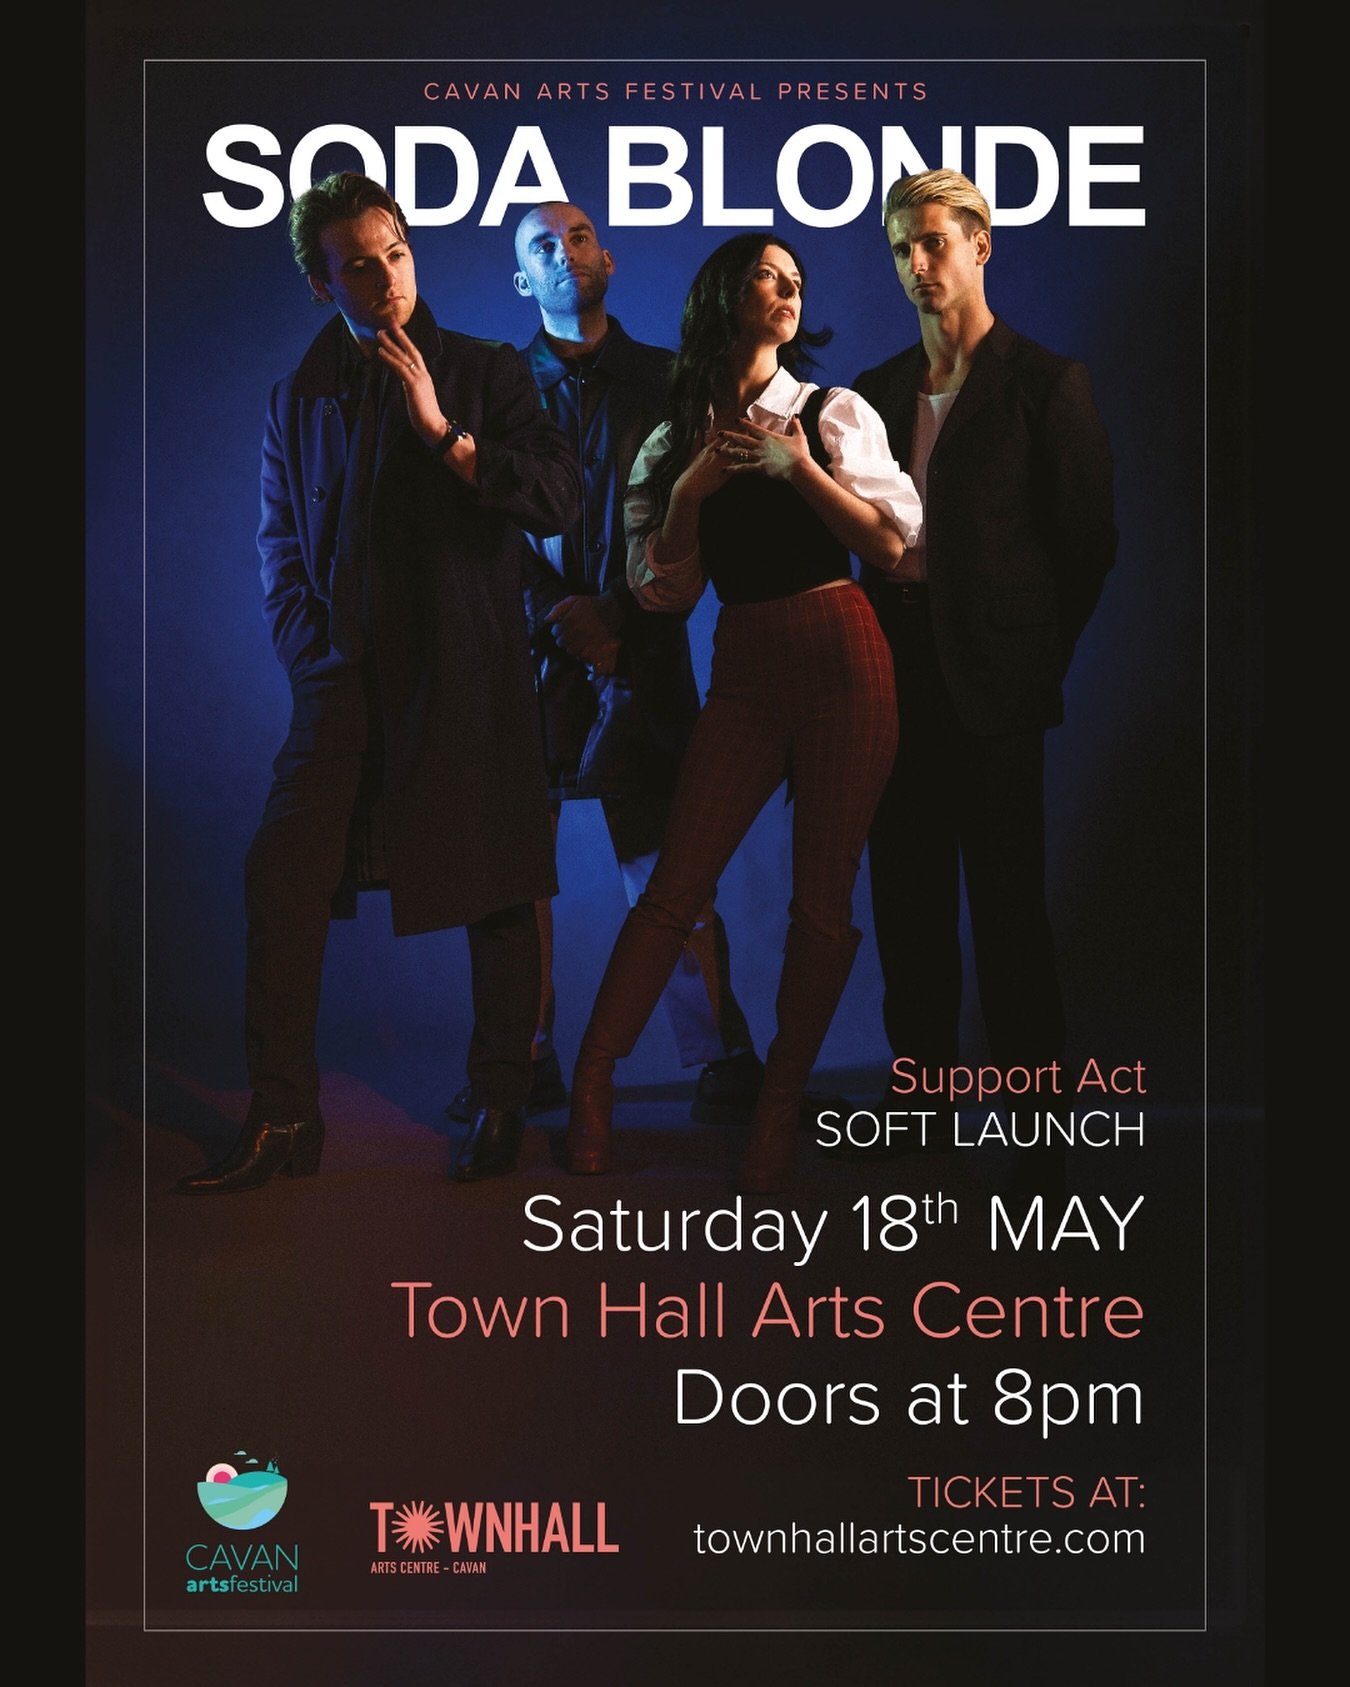 We play the Town Hall Arts Centre for @cavanartsfestival on Saturday May 18 with support from Soft Launch. Tickets on sale now!